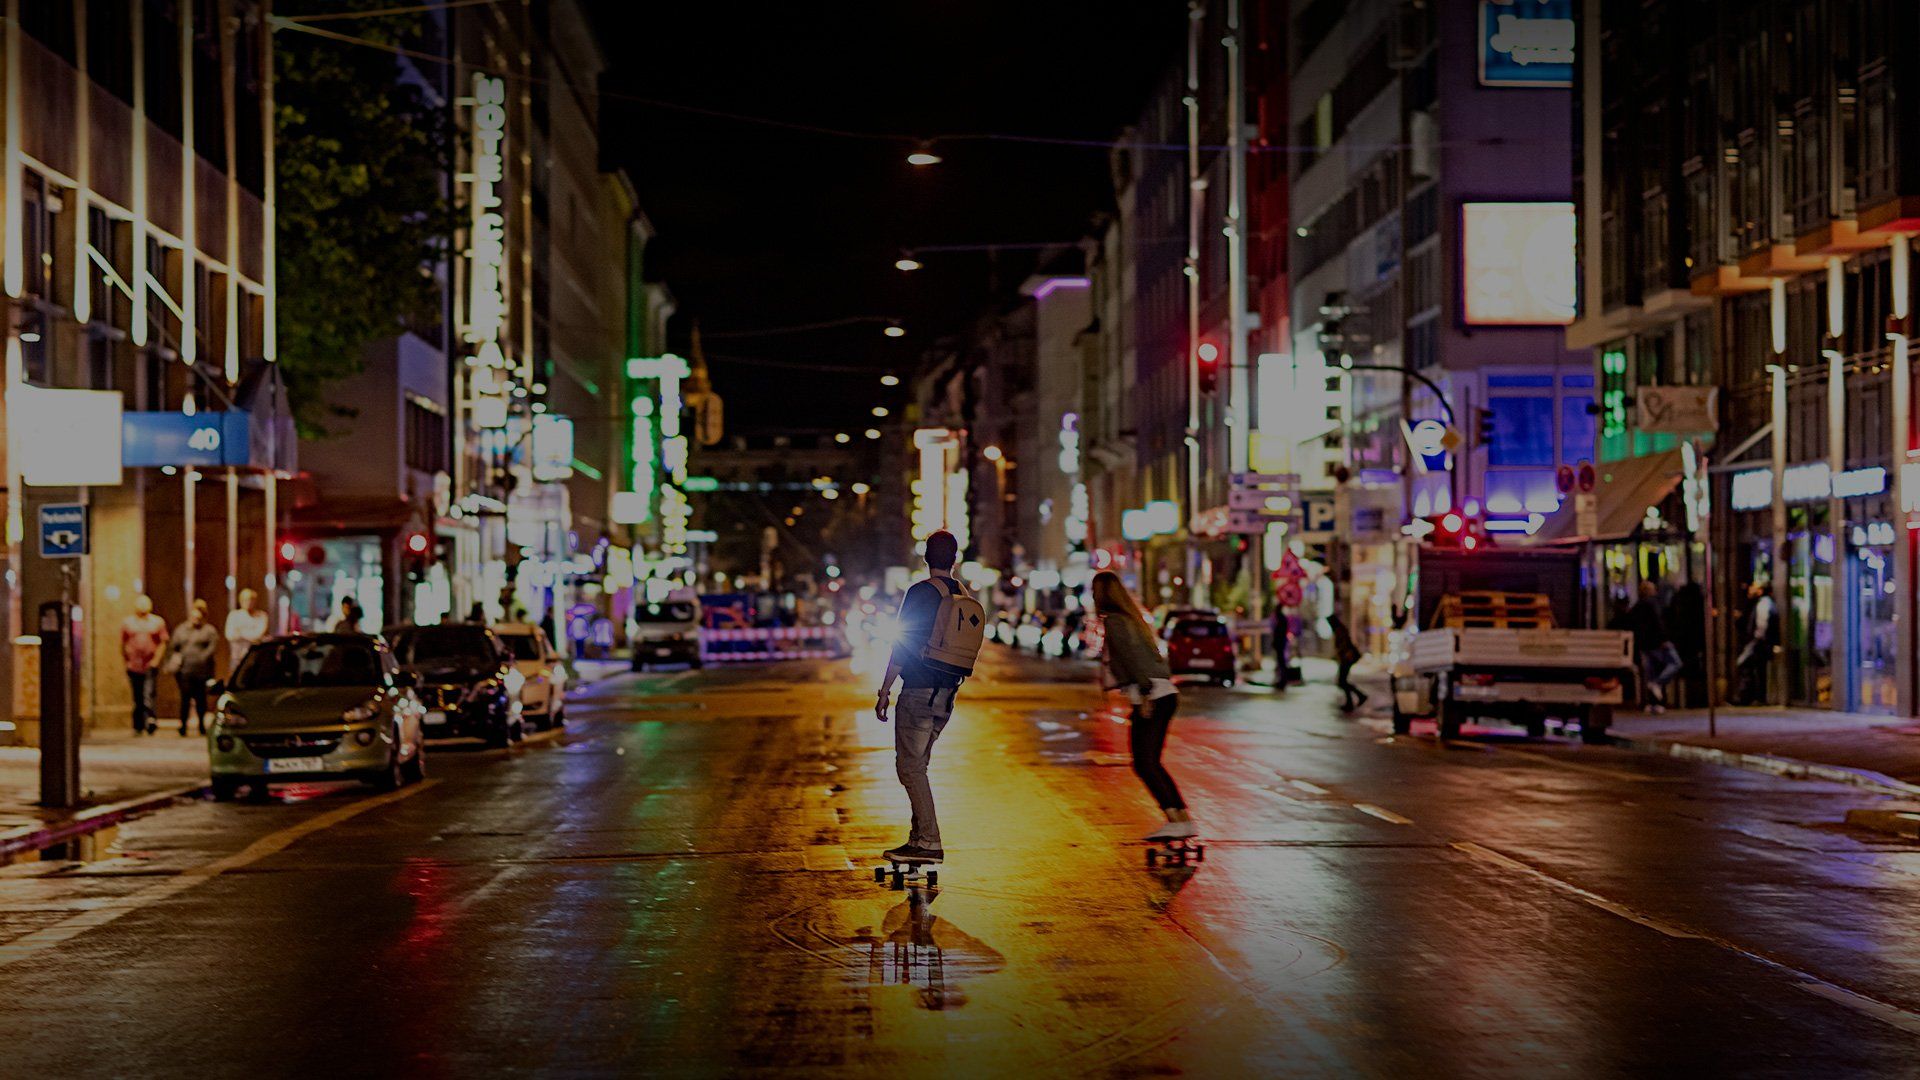 Two people skateboard down a city street at night, lights from buildings reflecting in the wet road surface.